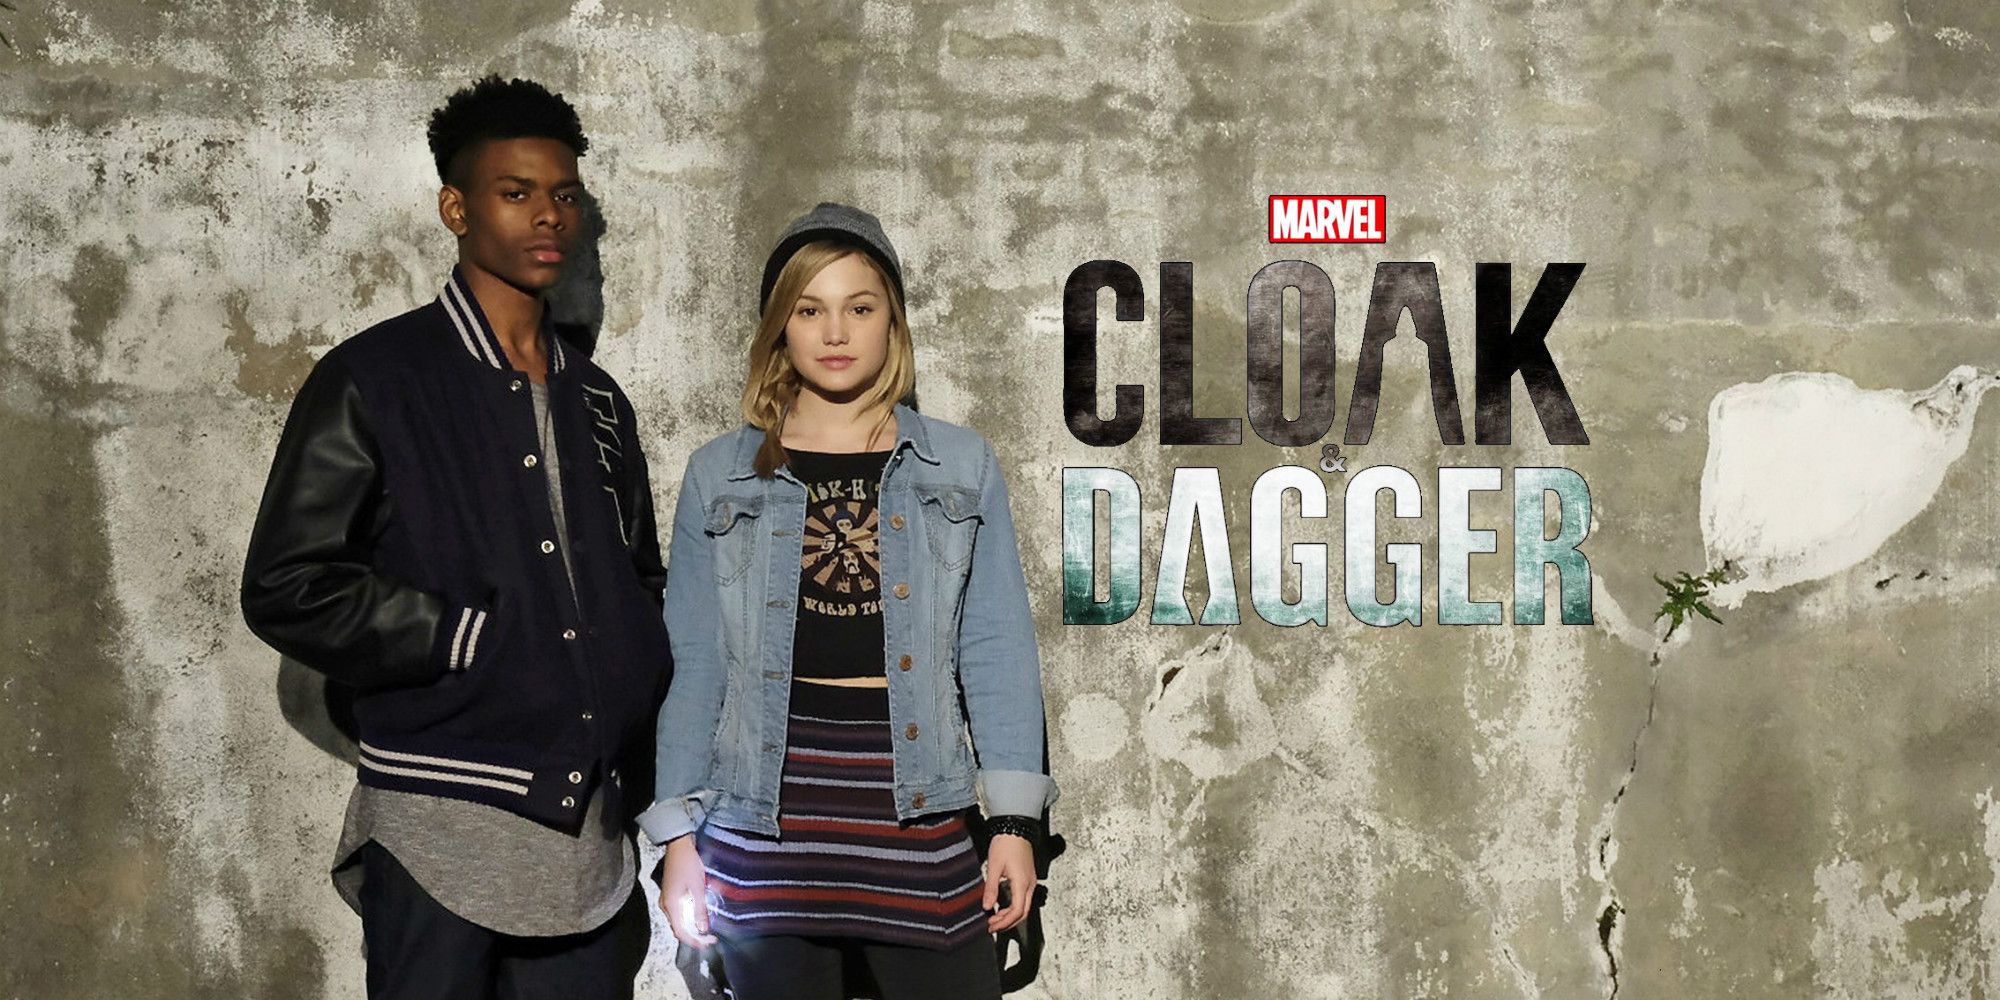 Poster for the show Marvel's Cloak &amp; Dagger showing the main characters